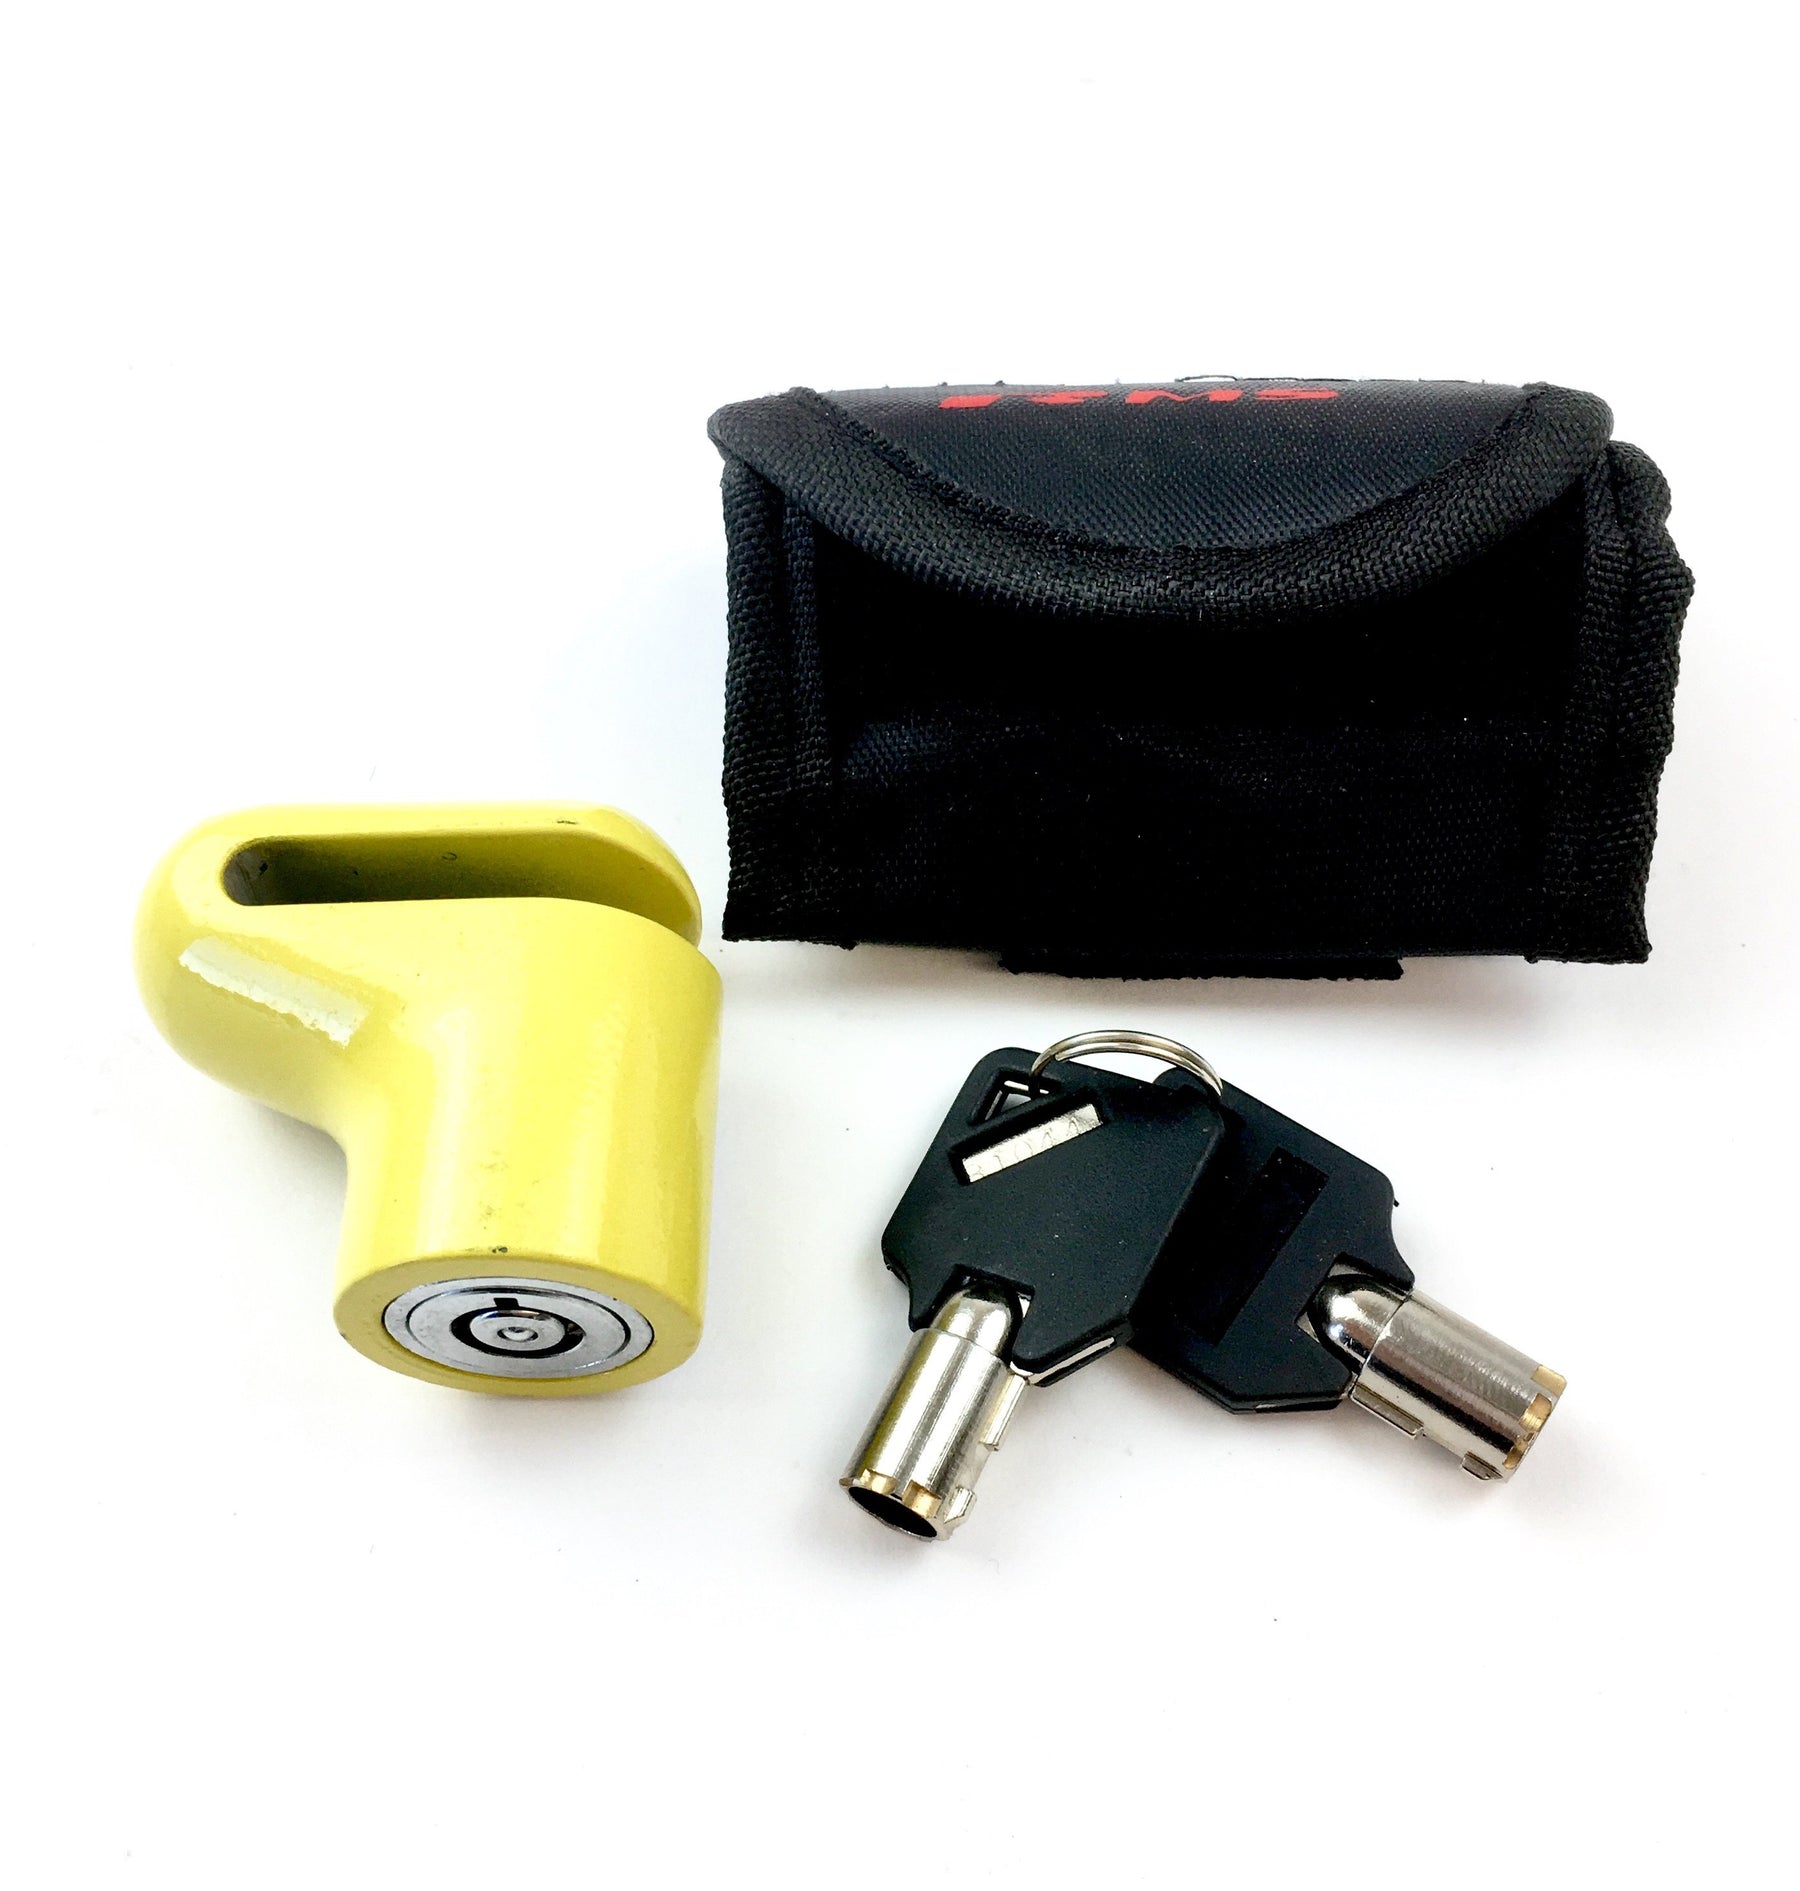 Lock - Disc Lock - 6mm Pin - With Case - 28 800 0130 - Yellow